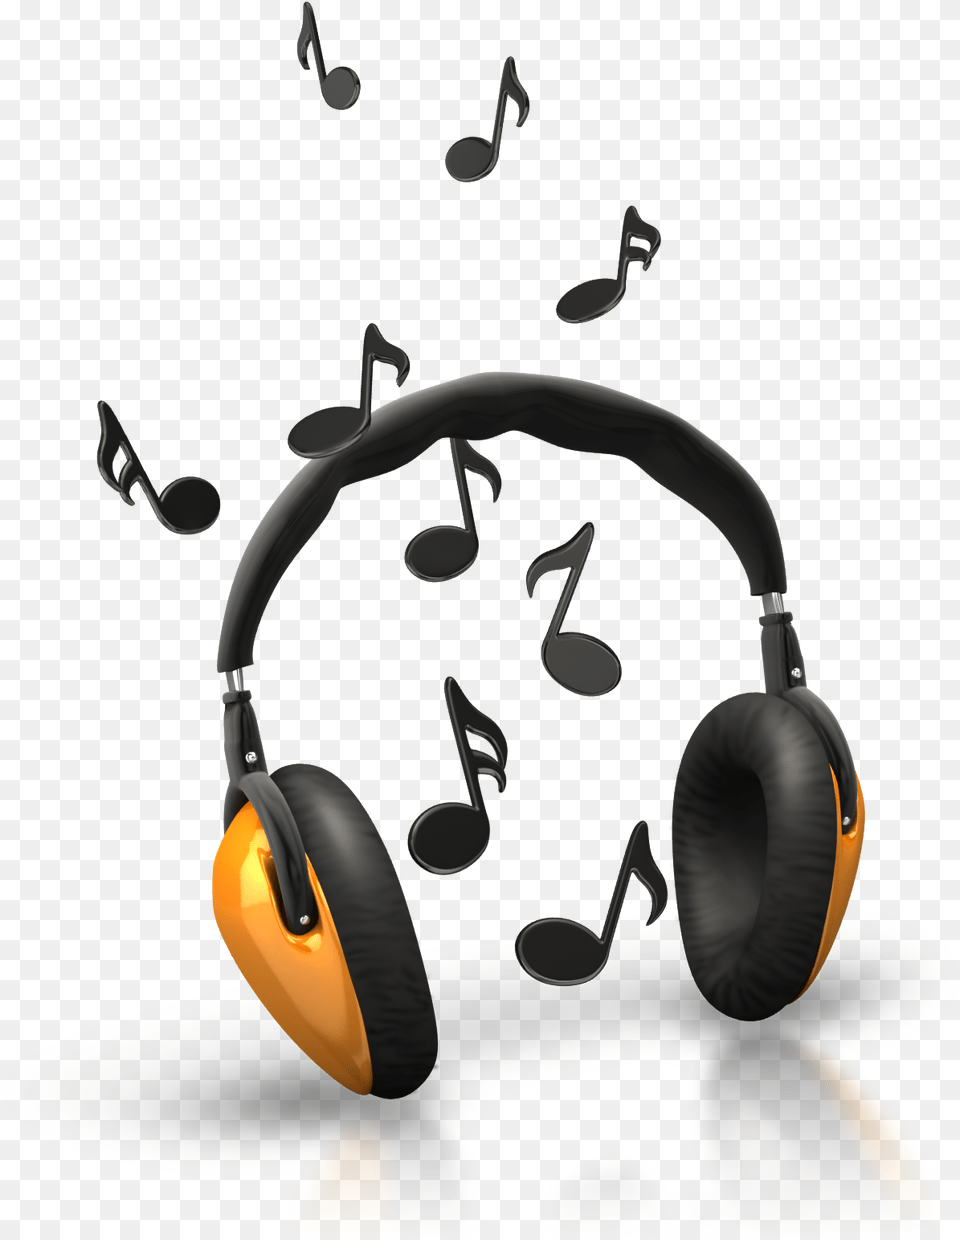 Headphones Clipart Music Note Listening To Music Headphones Clipart, Electronics Free Transparent Png